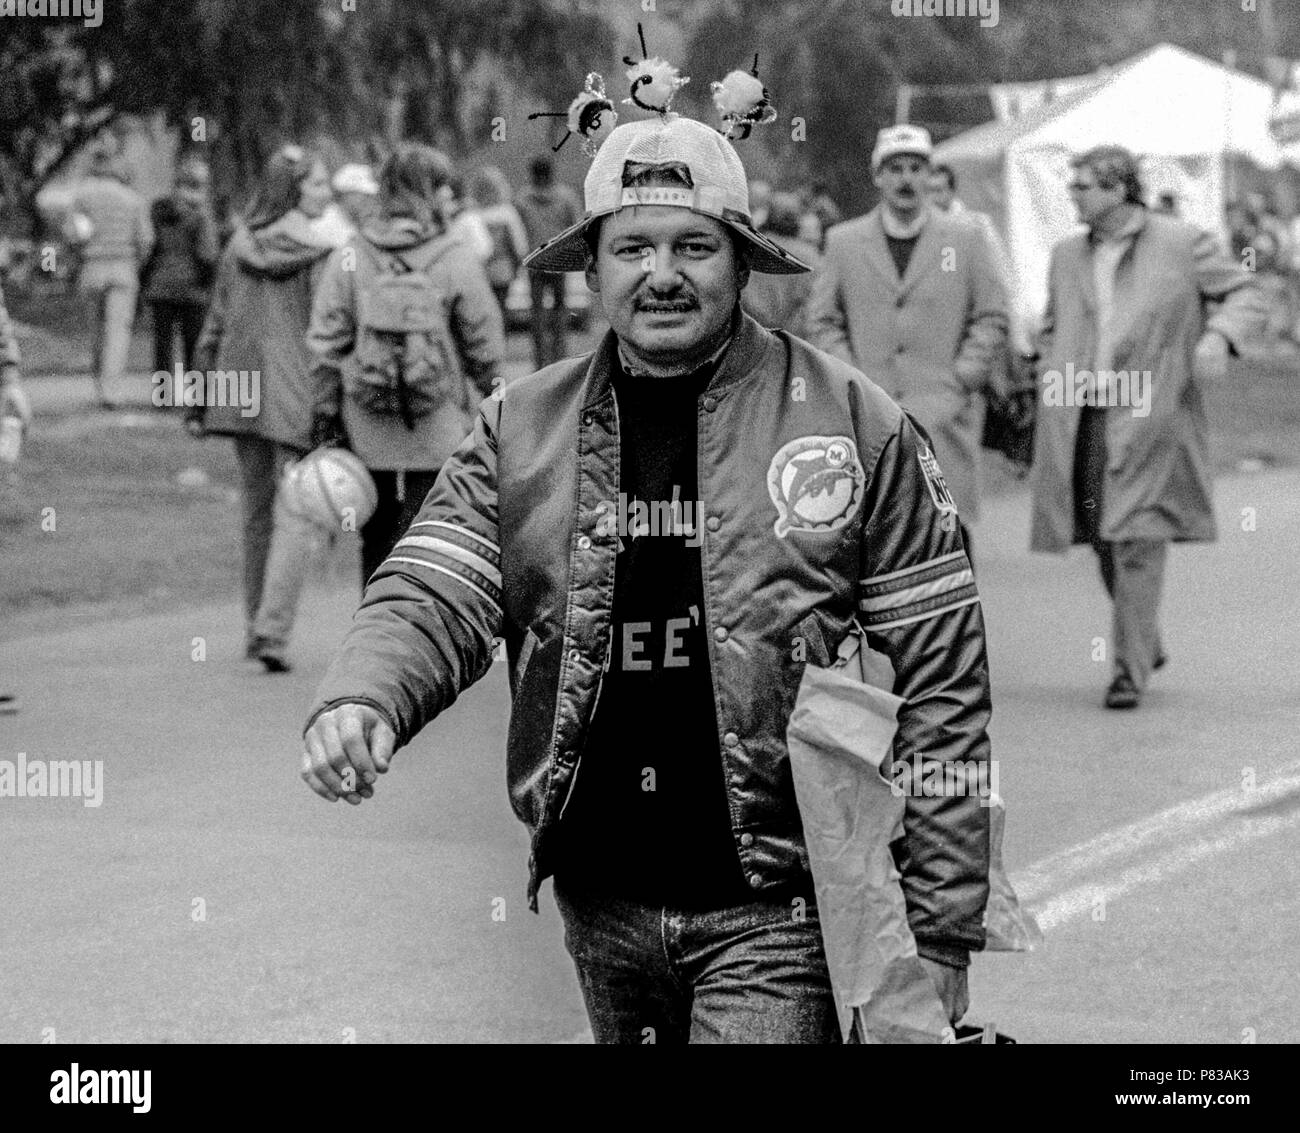 Stanford, California, USA. 20th Jan, 1985. Dolphins fan is ready to have fun at the Super Bowl XIX tailgate on the Stanford University campus. The San Francisco 49ers defeated the Miami Dolphins 38-16 on Sunday, January 20, 1985. Credit: Al Golub/ZUMA Wire/Alamy Live News Stock Photo